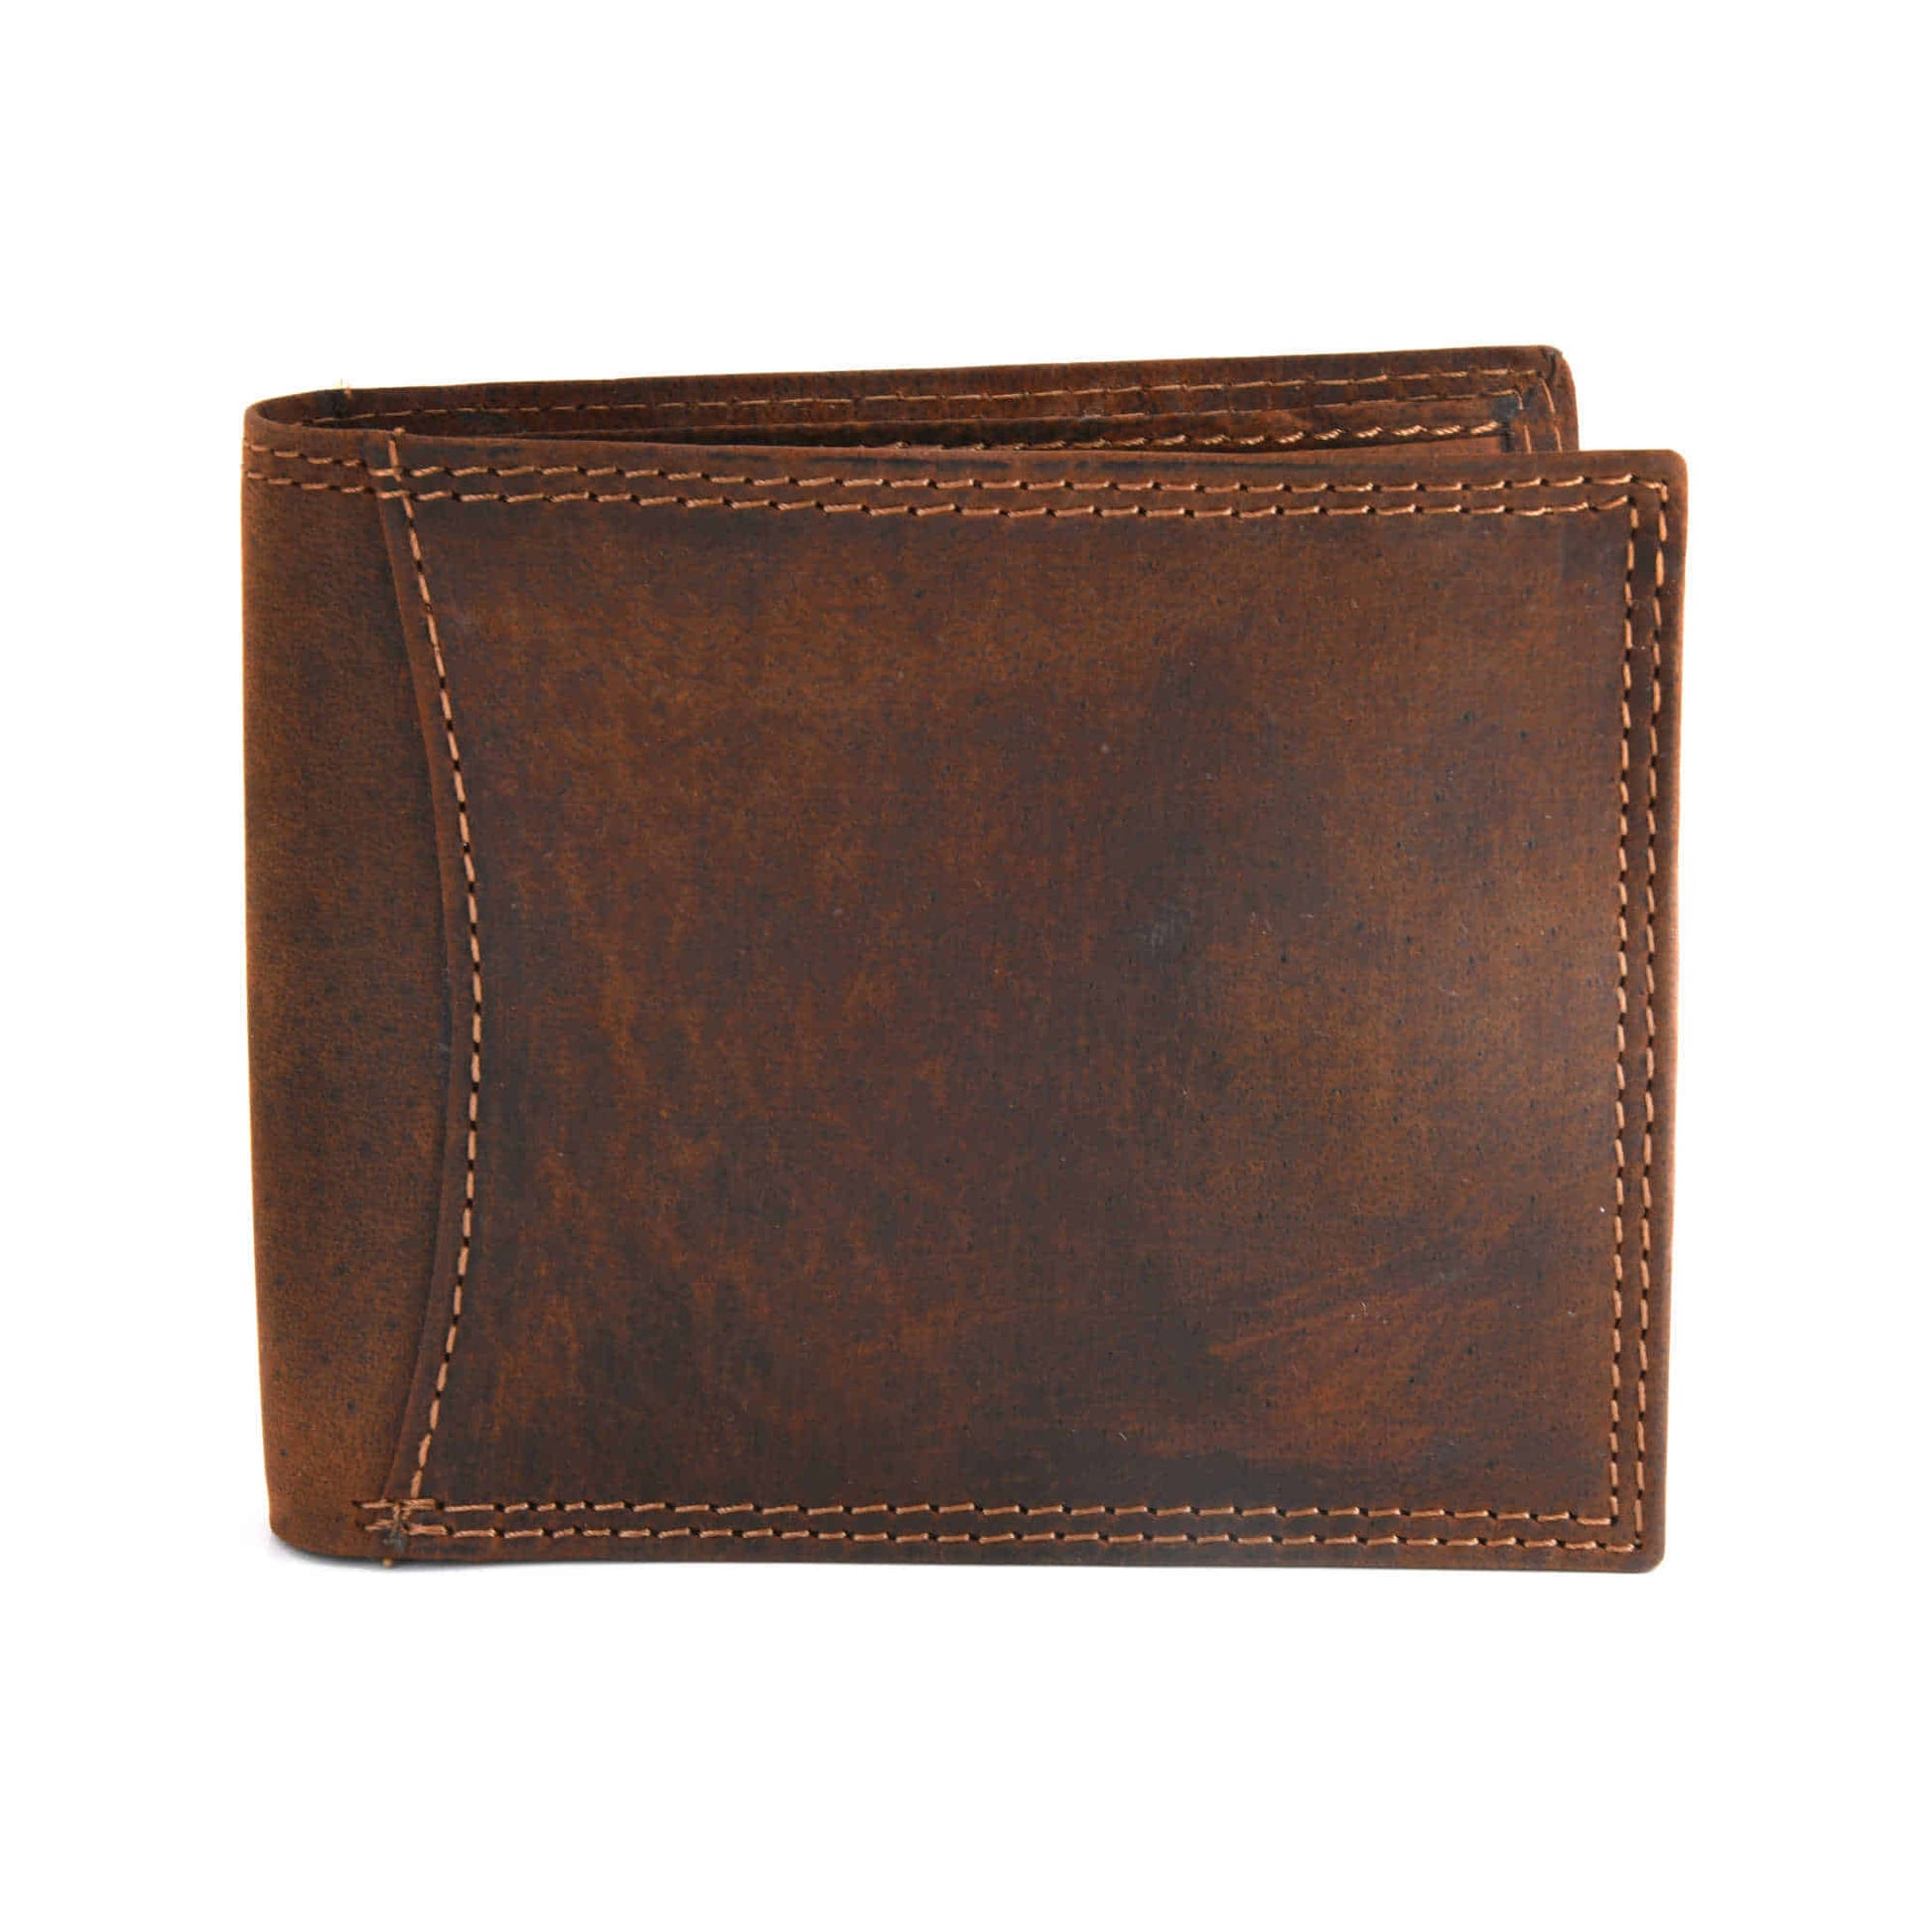 Style n Craft 300796-BR Bi-Fold PassCase Wallet with Flap in Full Grain Vintage Look Leather - brown color - closed view front